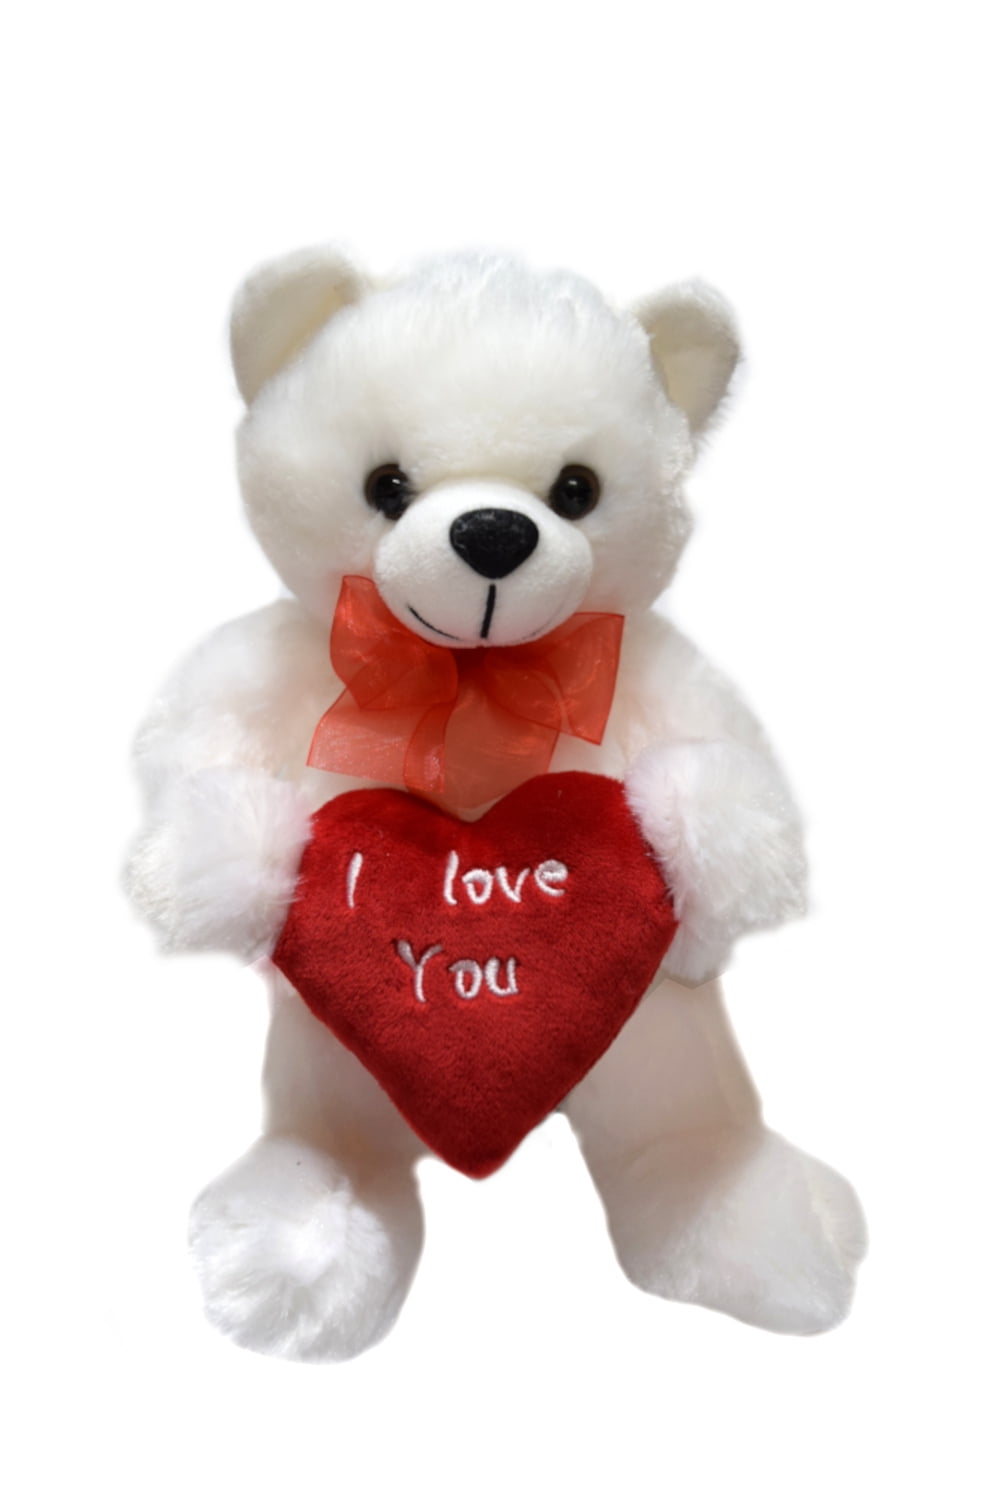 3 White Soft Teddy Bears KEY CHAIN with Red Heart "I Love You" Key Chains 